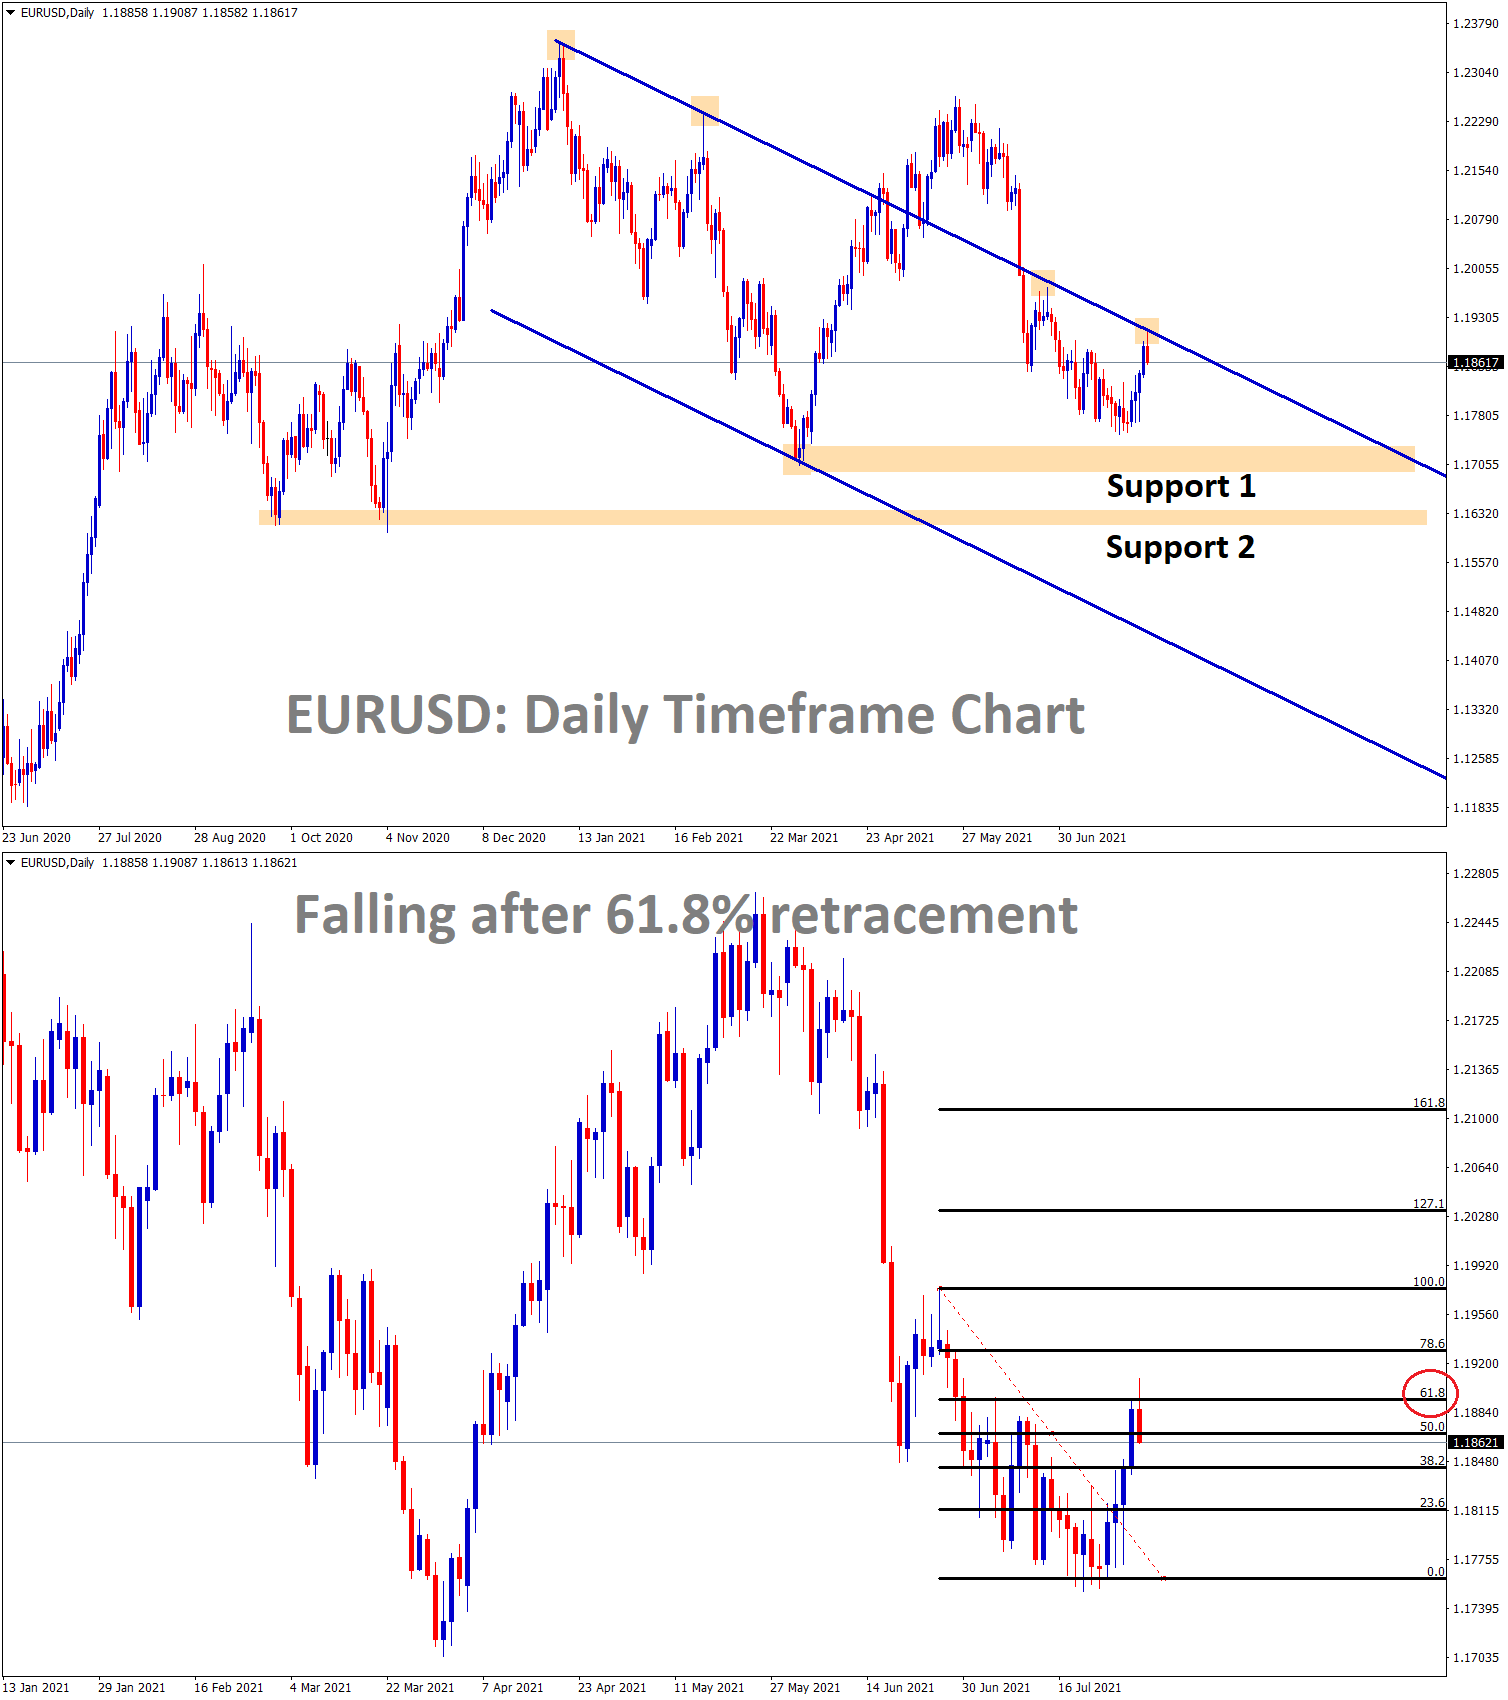 EURUSD is falling from the lower high zone of the previous descending channel range EURUSD made a 61.8 retracement and started making a correction.